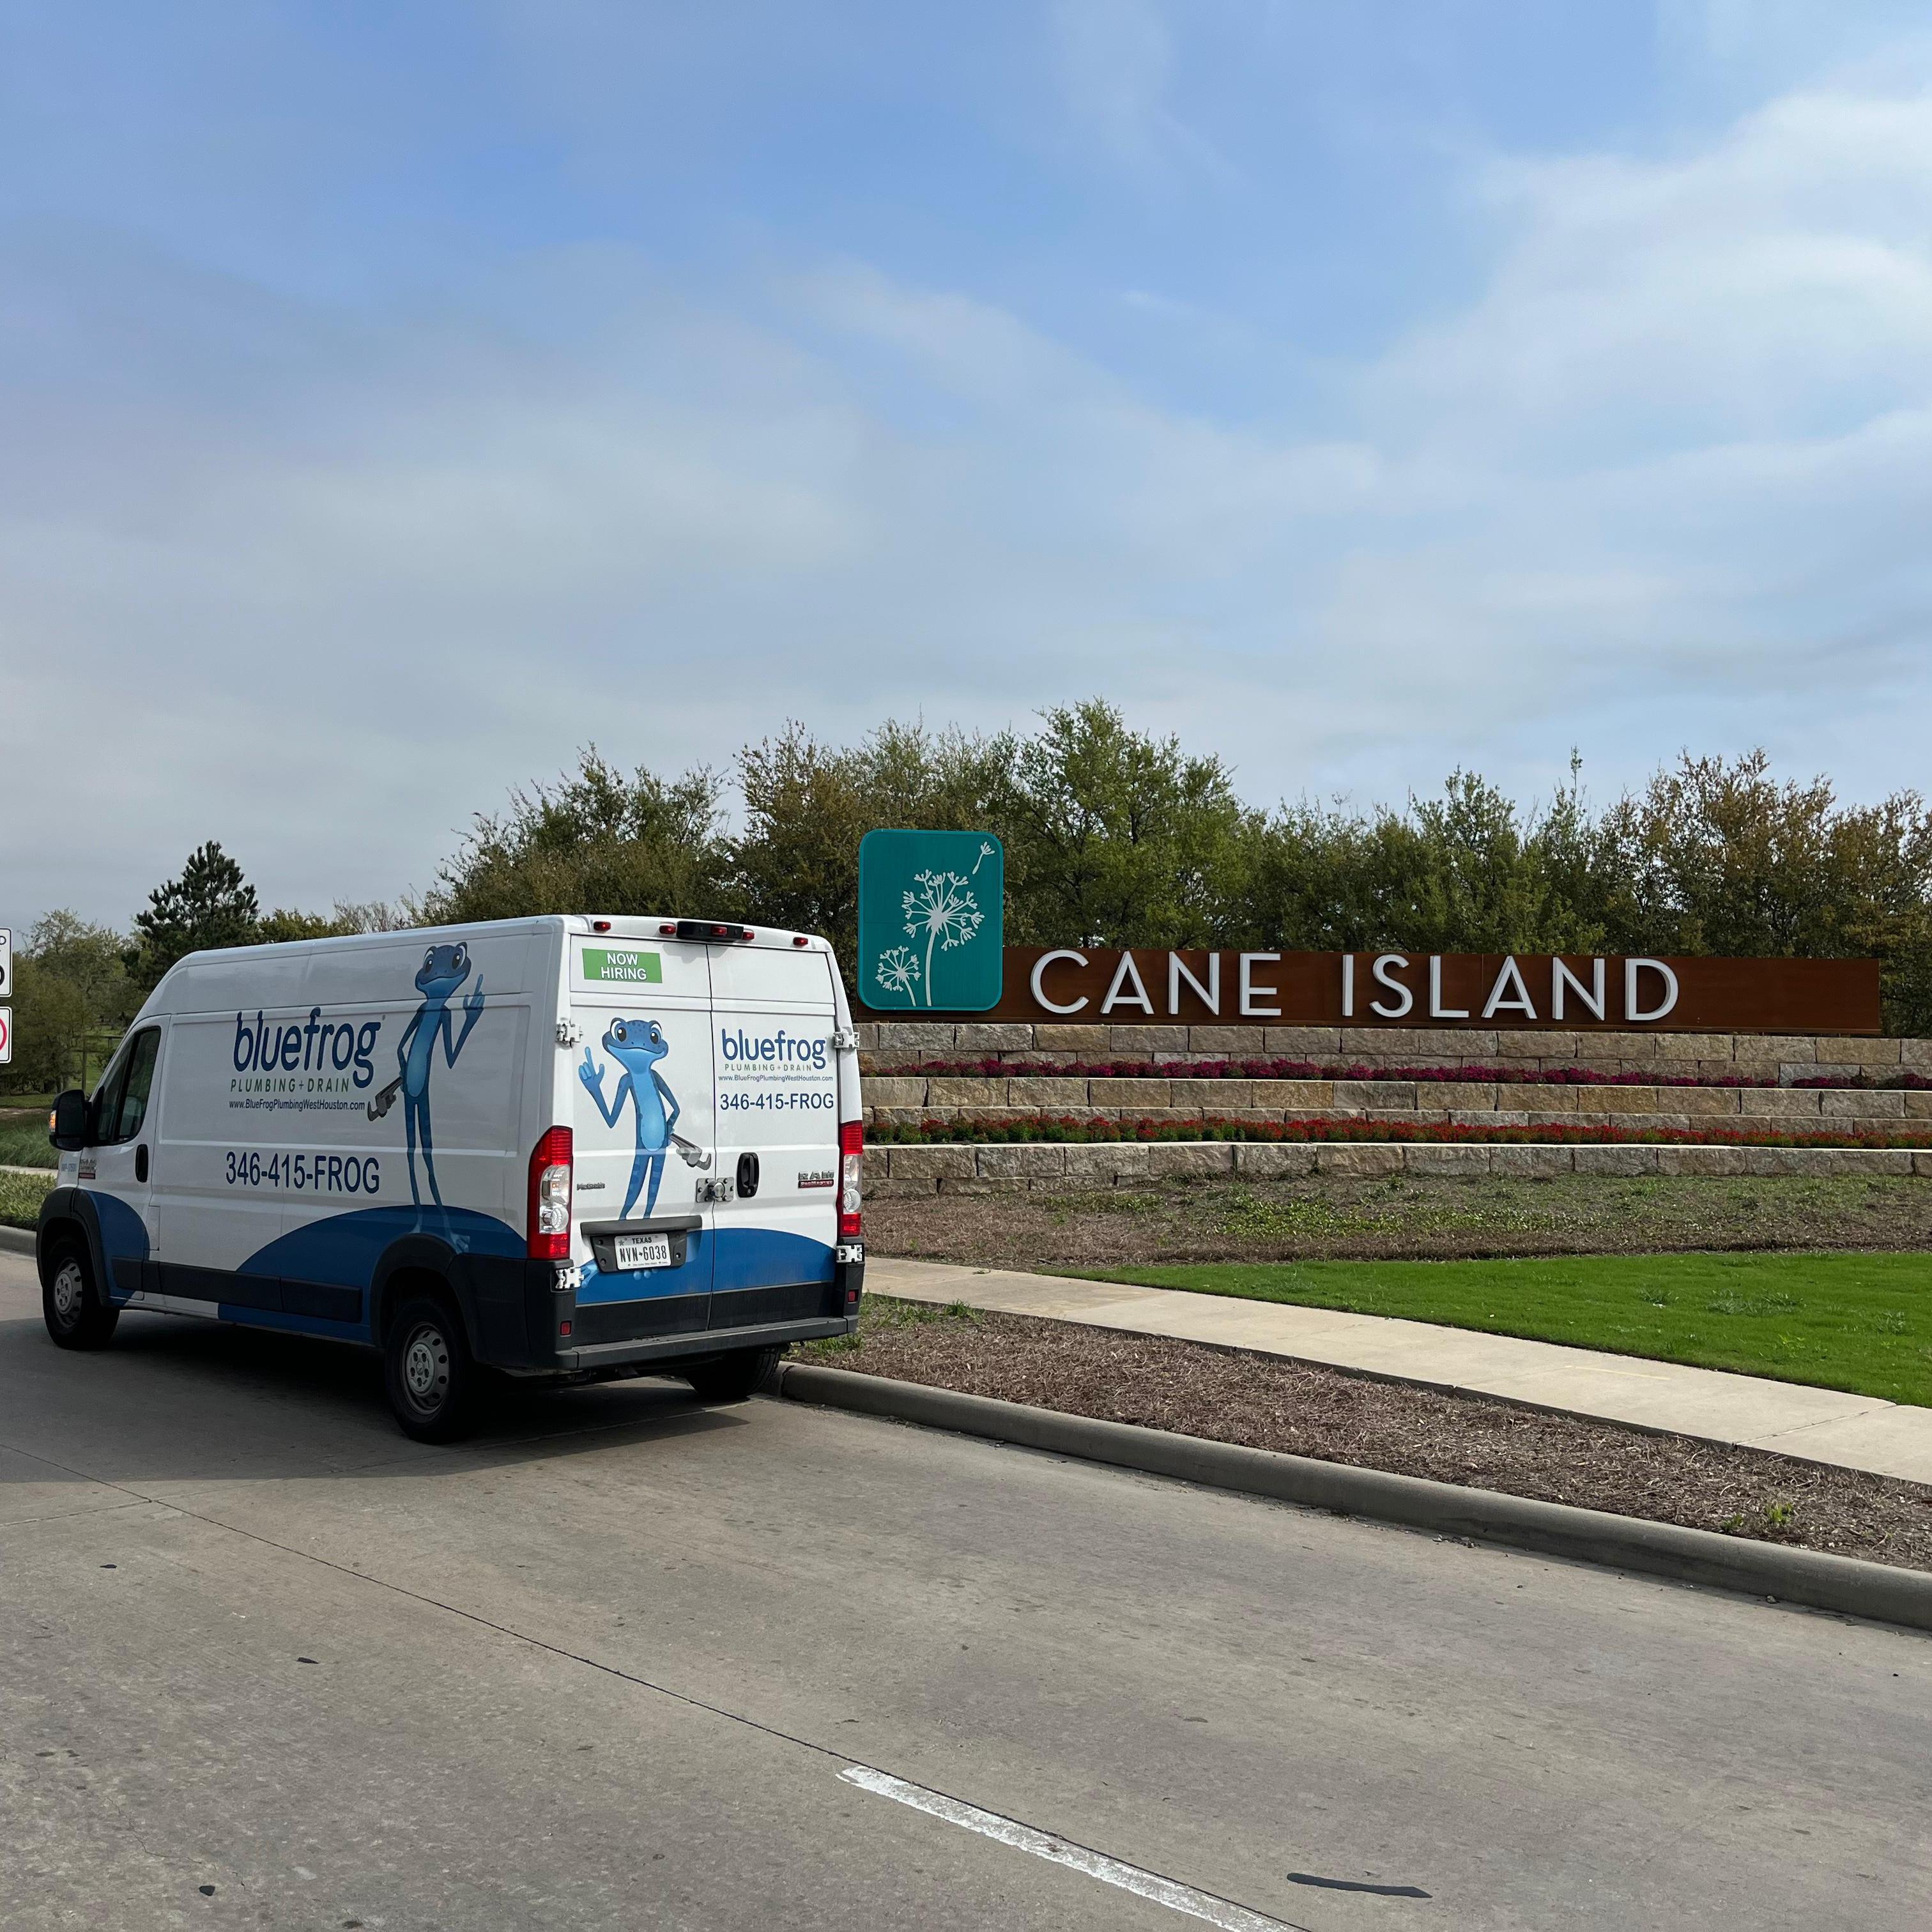 A bluefrog Plumbing and Drain service vehicle at Cane Island in Katy Texas